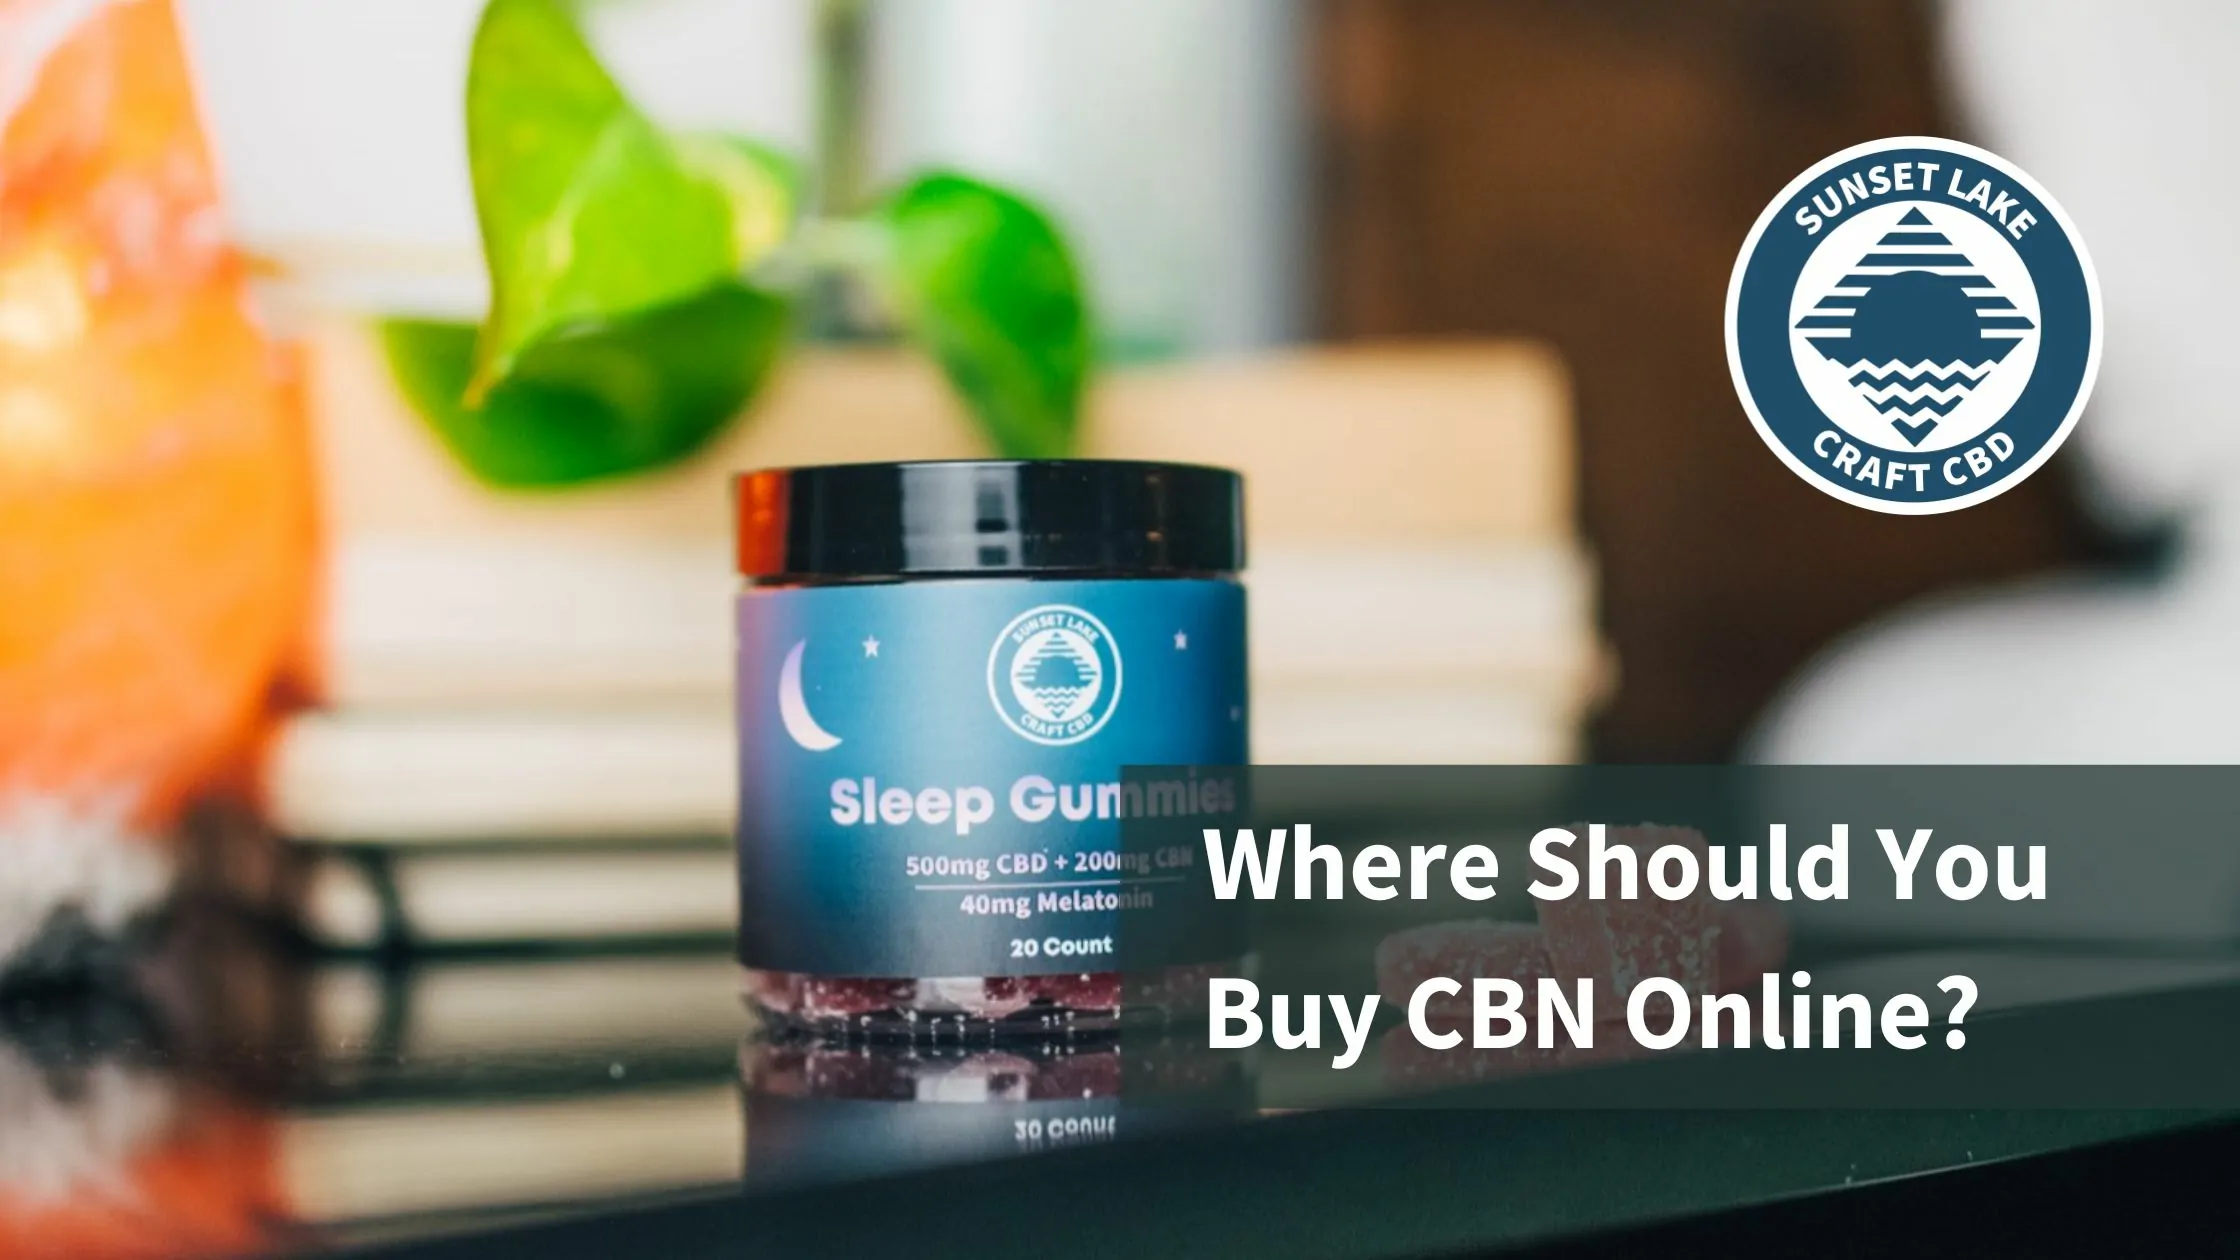 Where Should You Buy CBN Online?